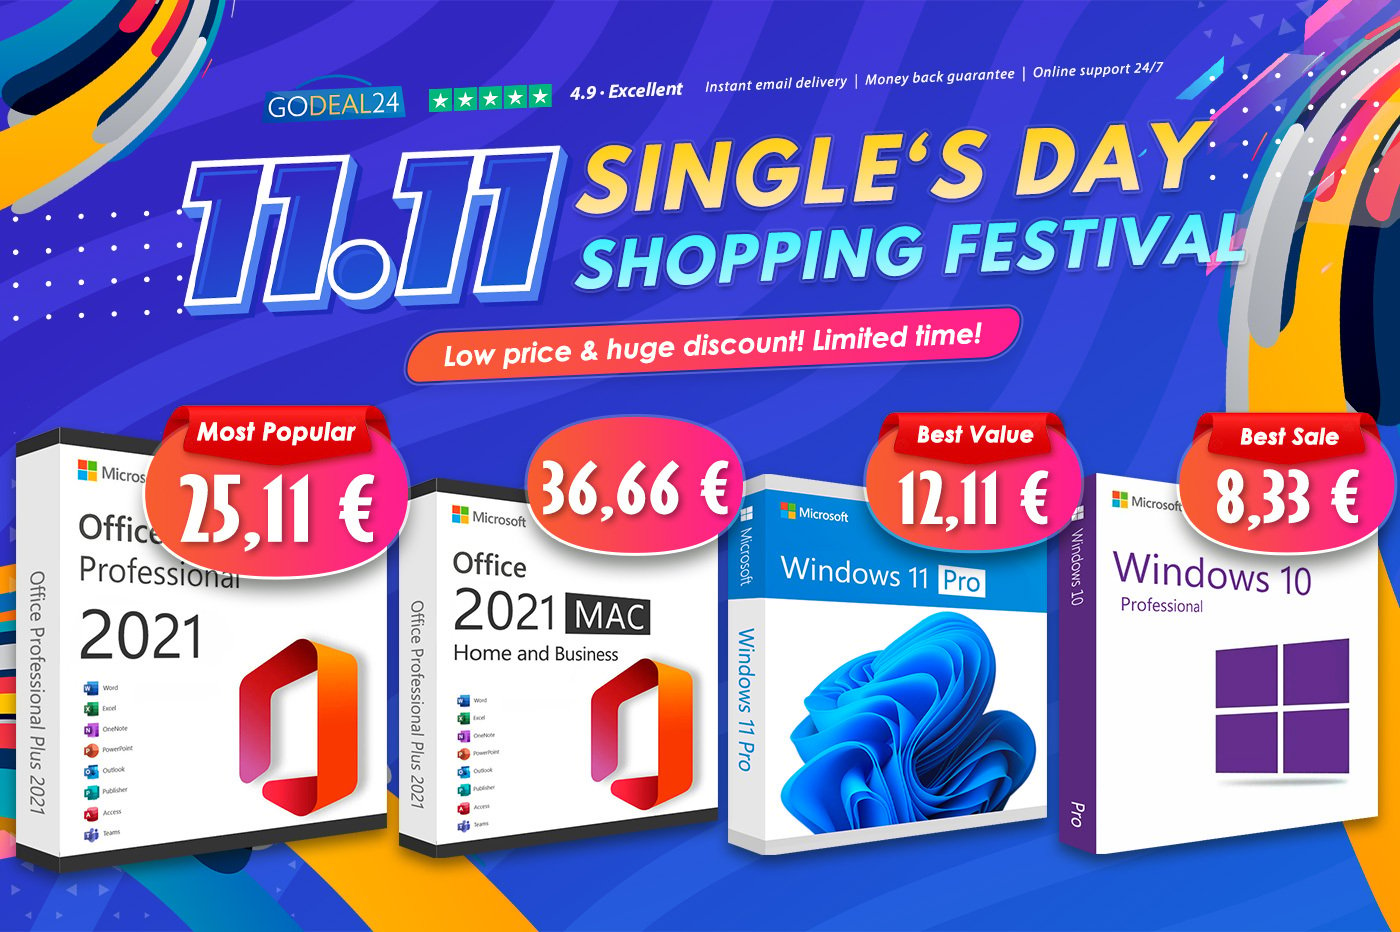 Godeal24 Single Day